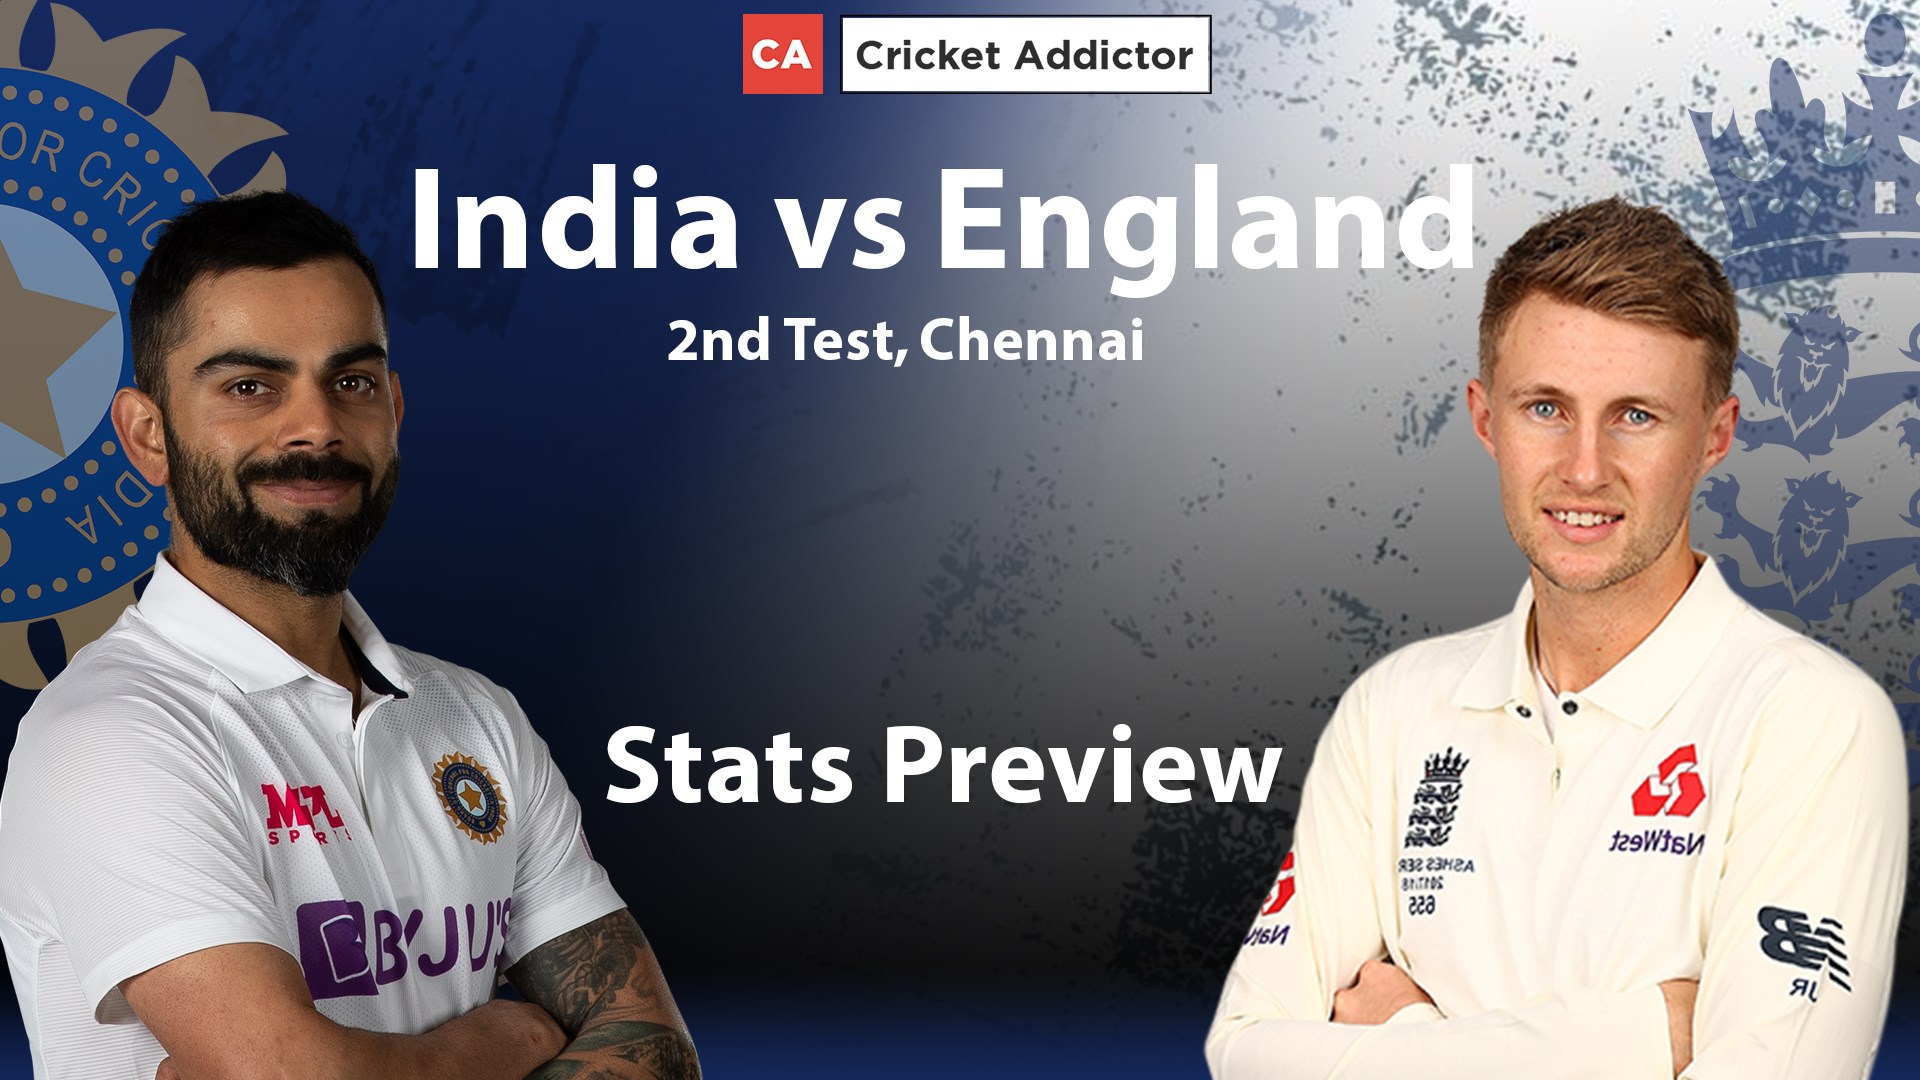 India vs England 3rd Test Live | IND vs ENG 3rd Test Live - Cricket 22 -  YouTube